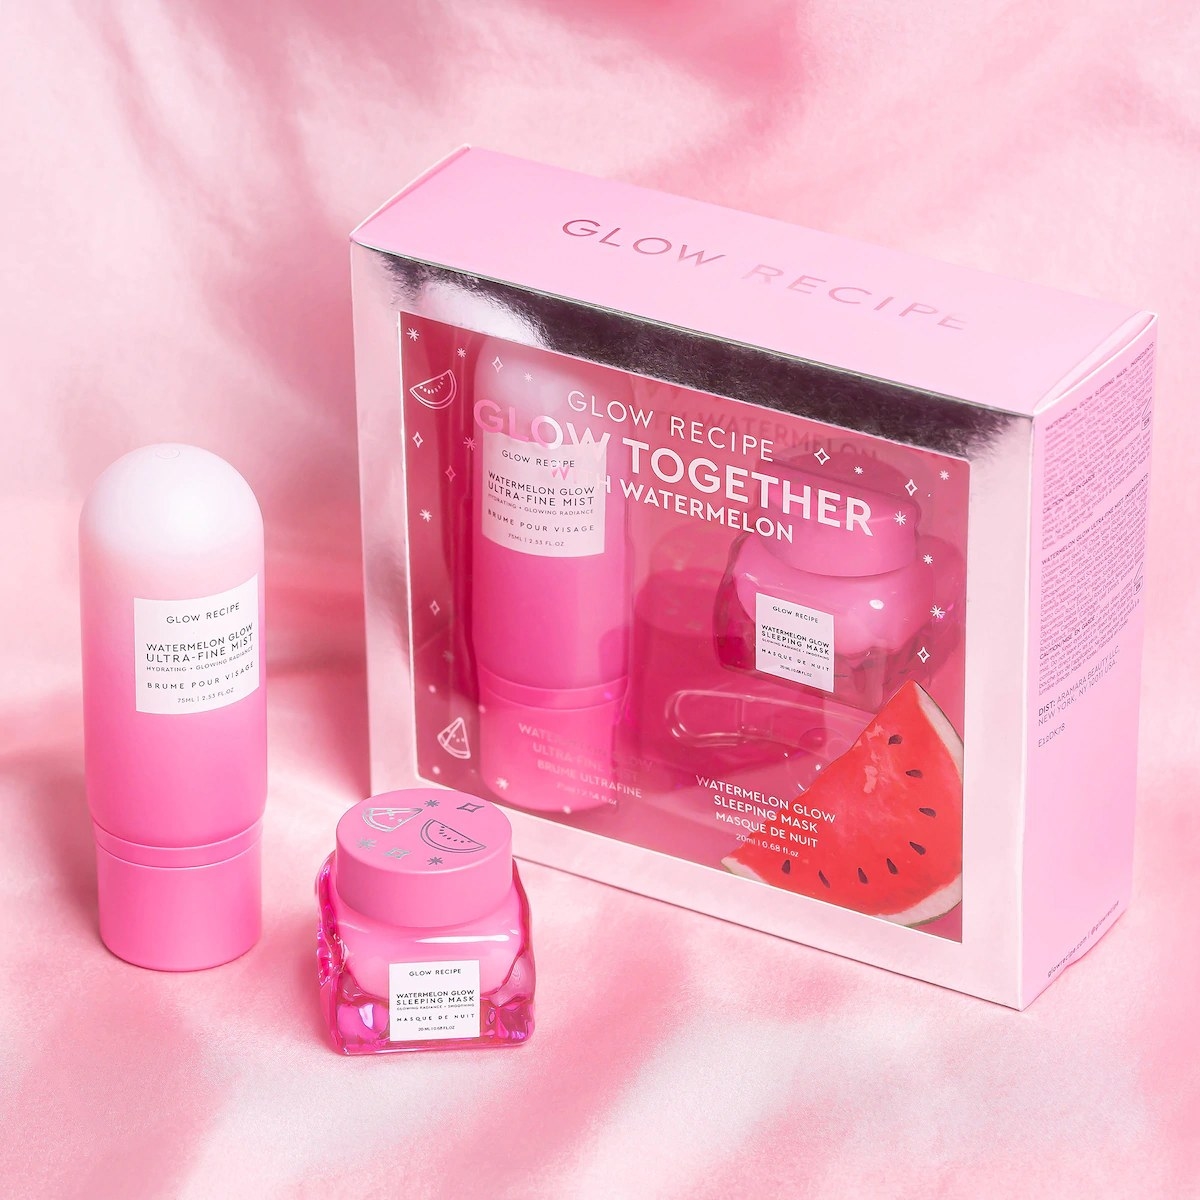 The set with a pink mist spray bottle and a pink jar for the sleeping mask 